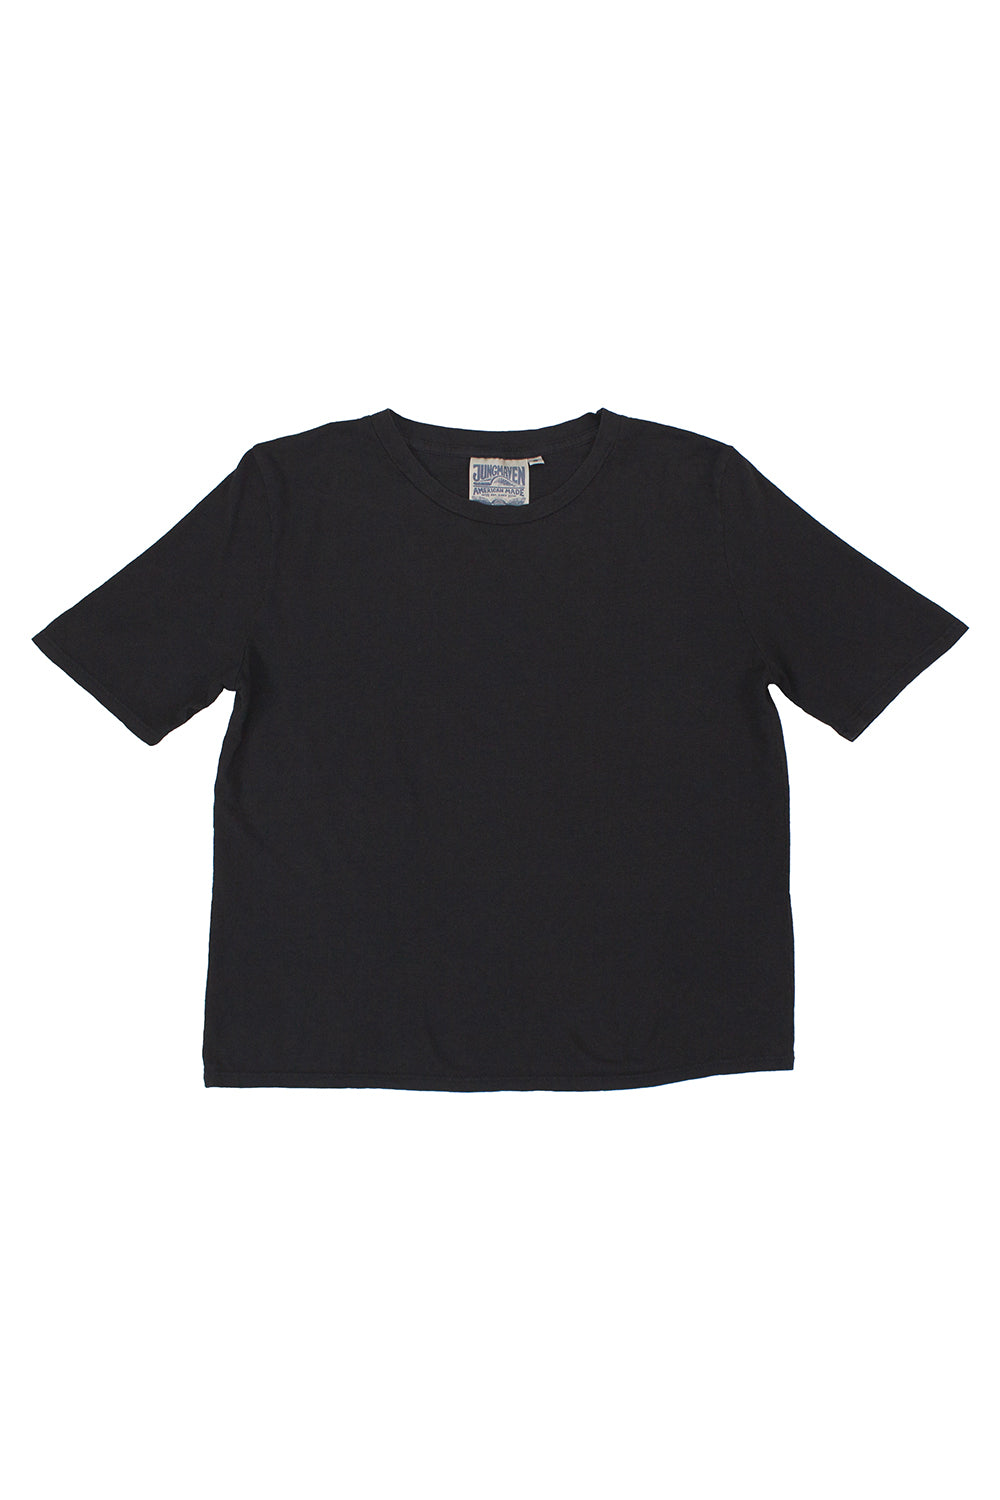 Silverlake Cropped Tee | Jungmaven Hemp Clothing & Accessories / Color: Black